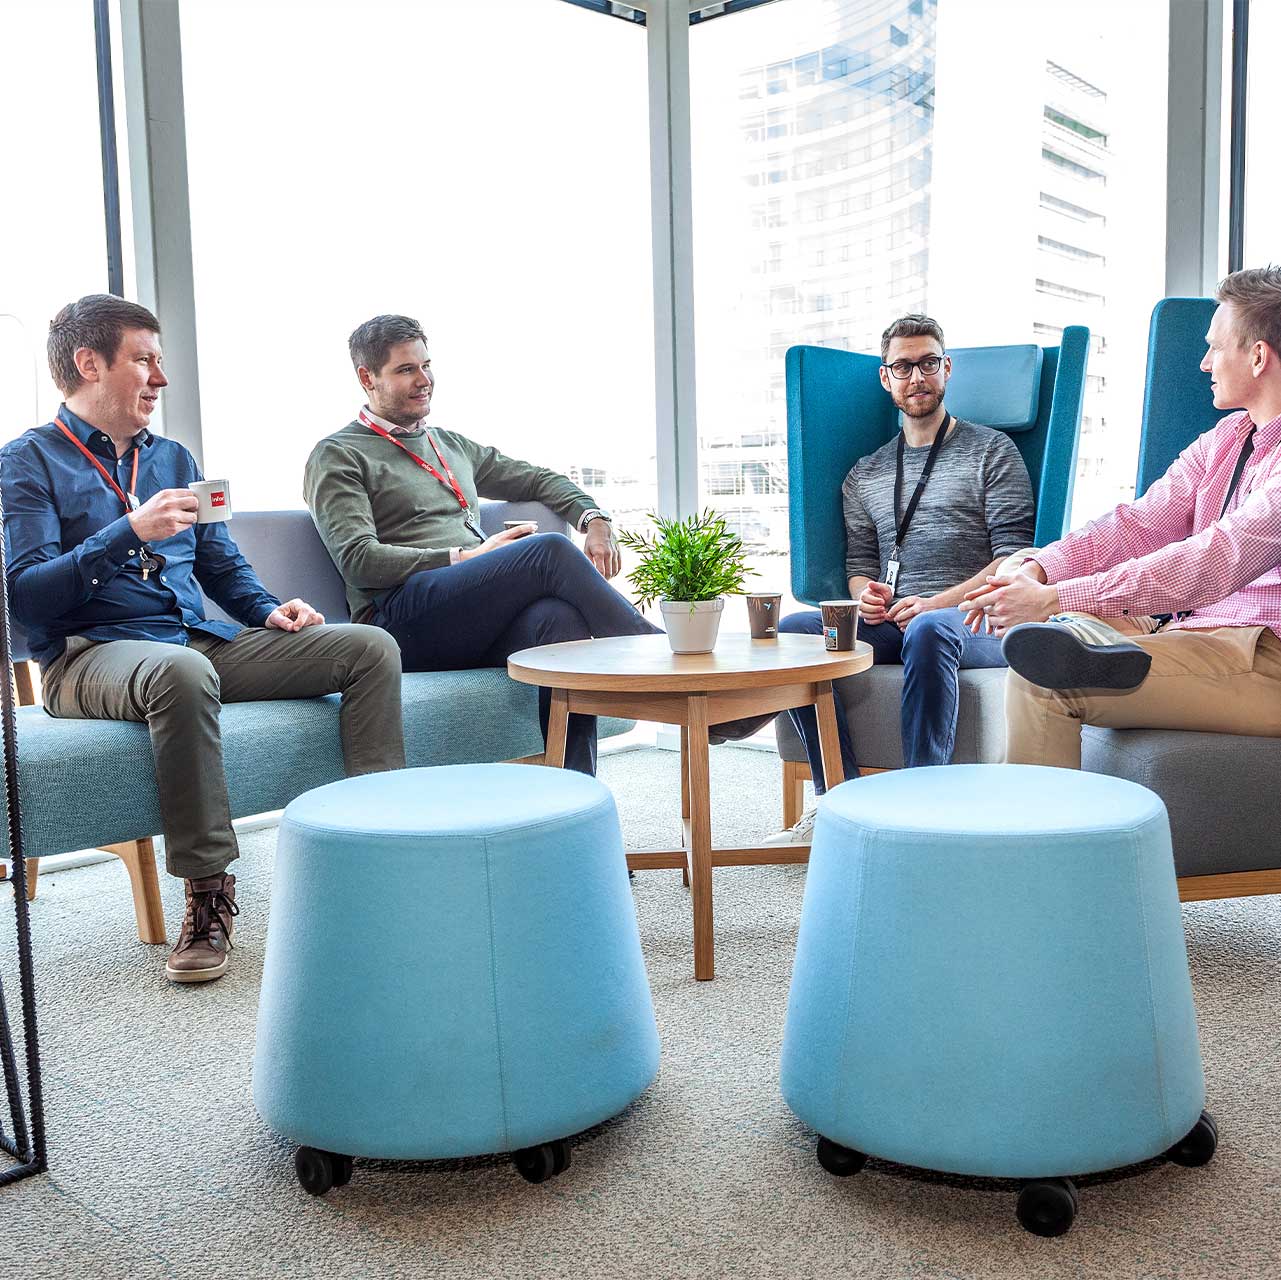 Co-workers meeting in breakout area refurbished by Mobius At Work